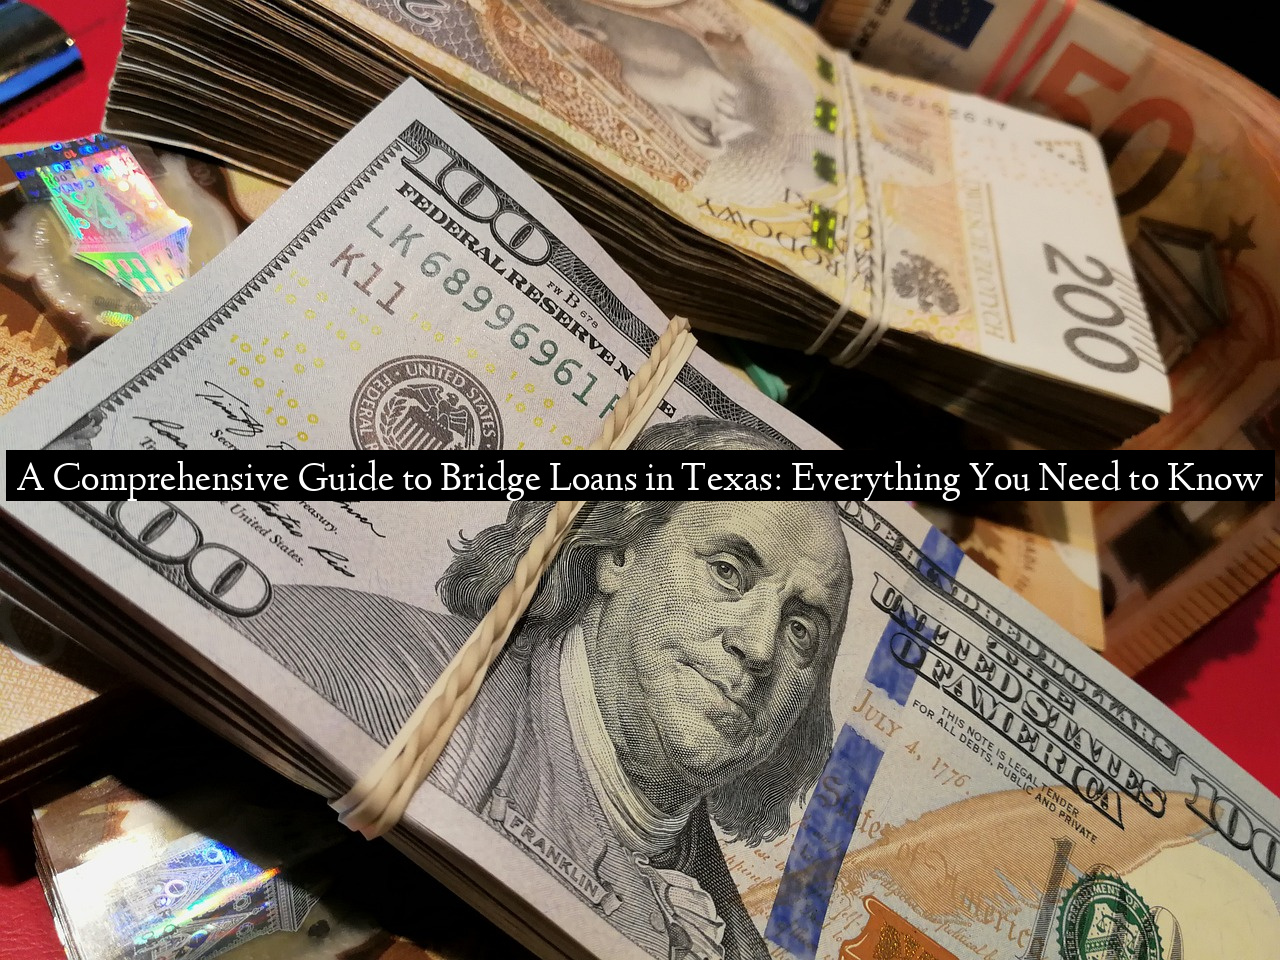 A Comprehensive Guide to Bridge Loans in Texas: Everything You Need to Know